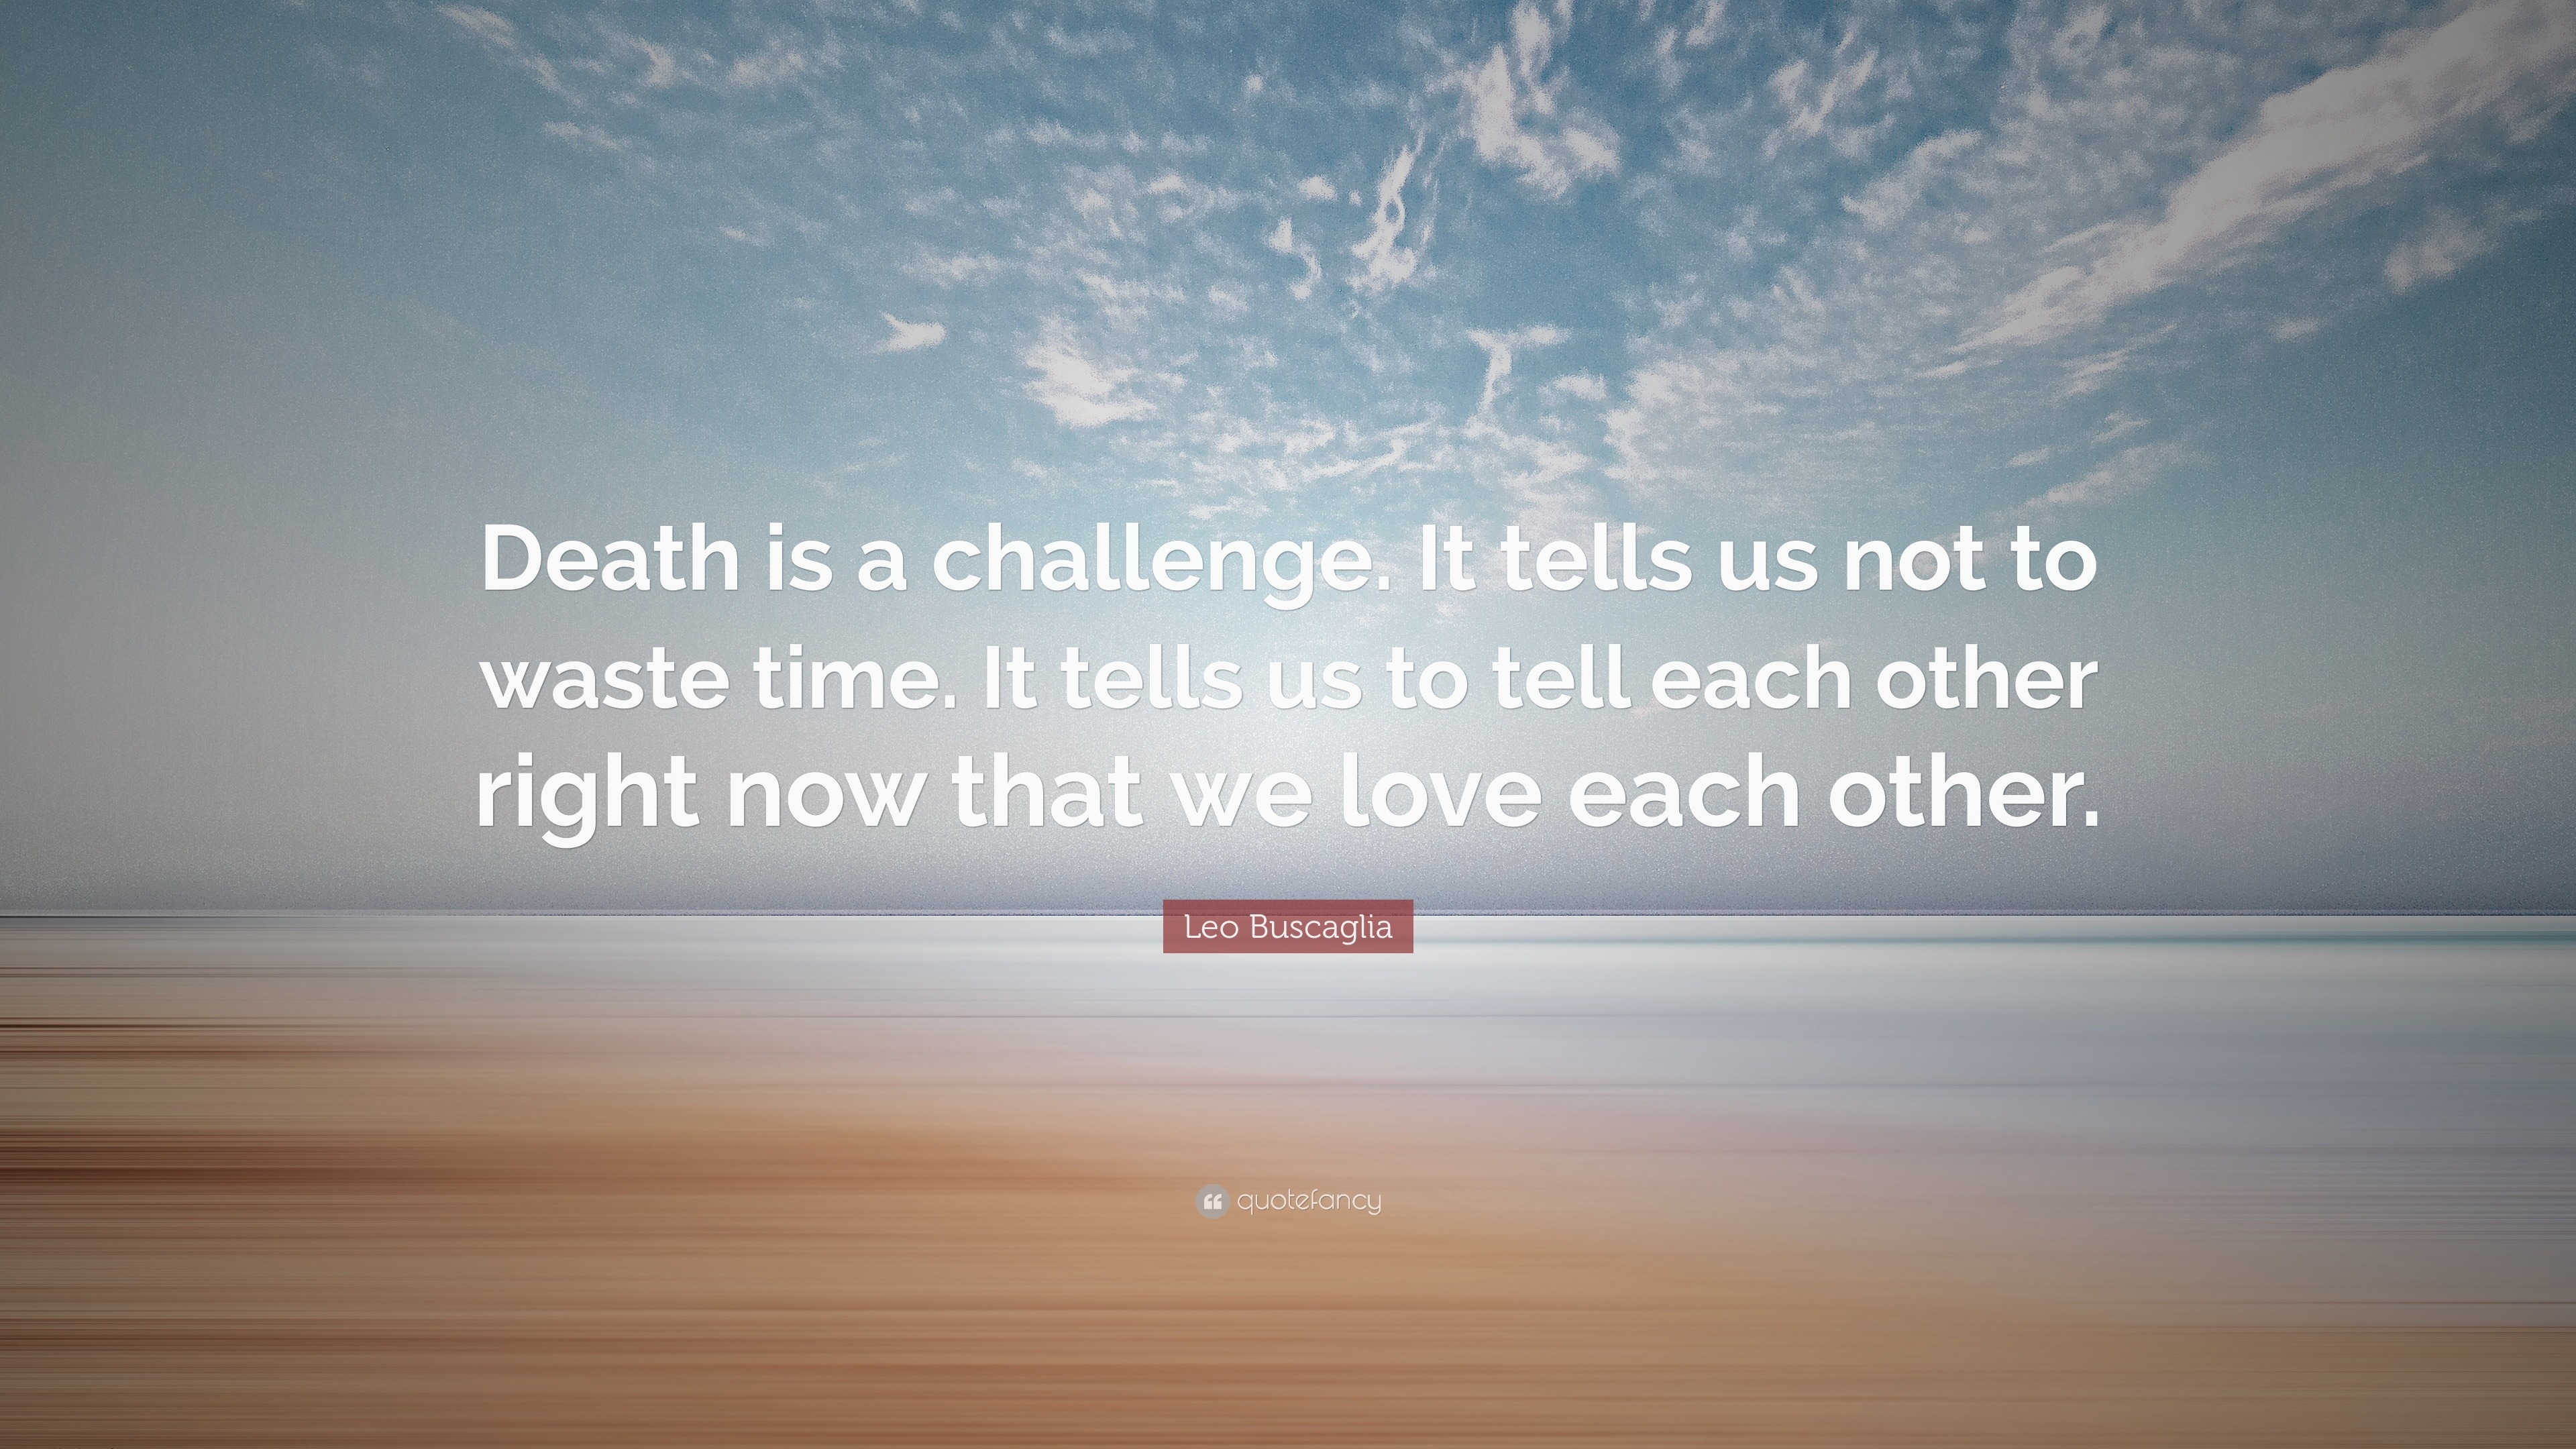 Leo Buscaglia Quote “Death is a challenge It tells us not to waste